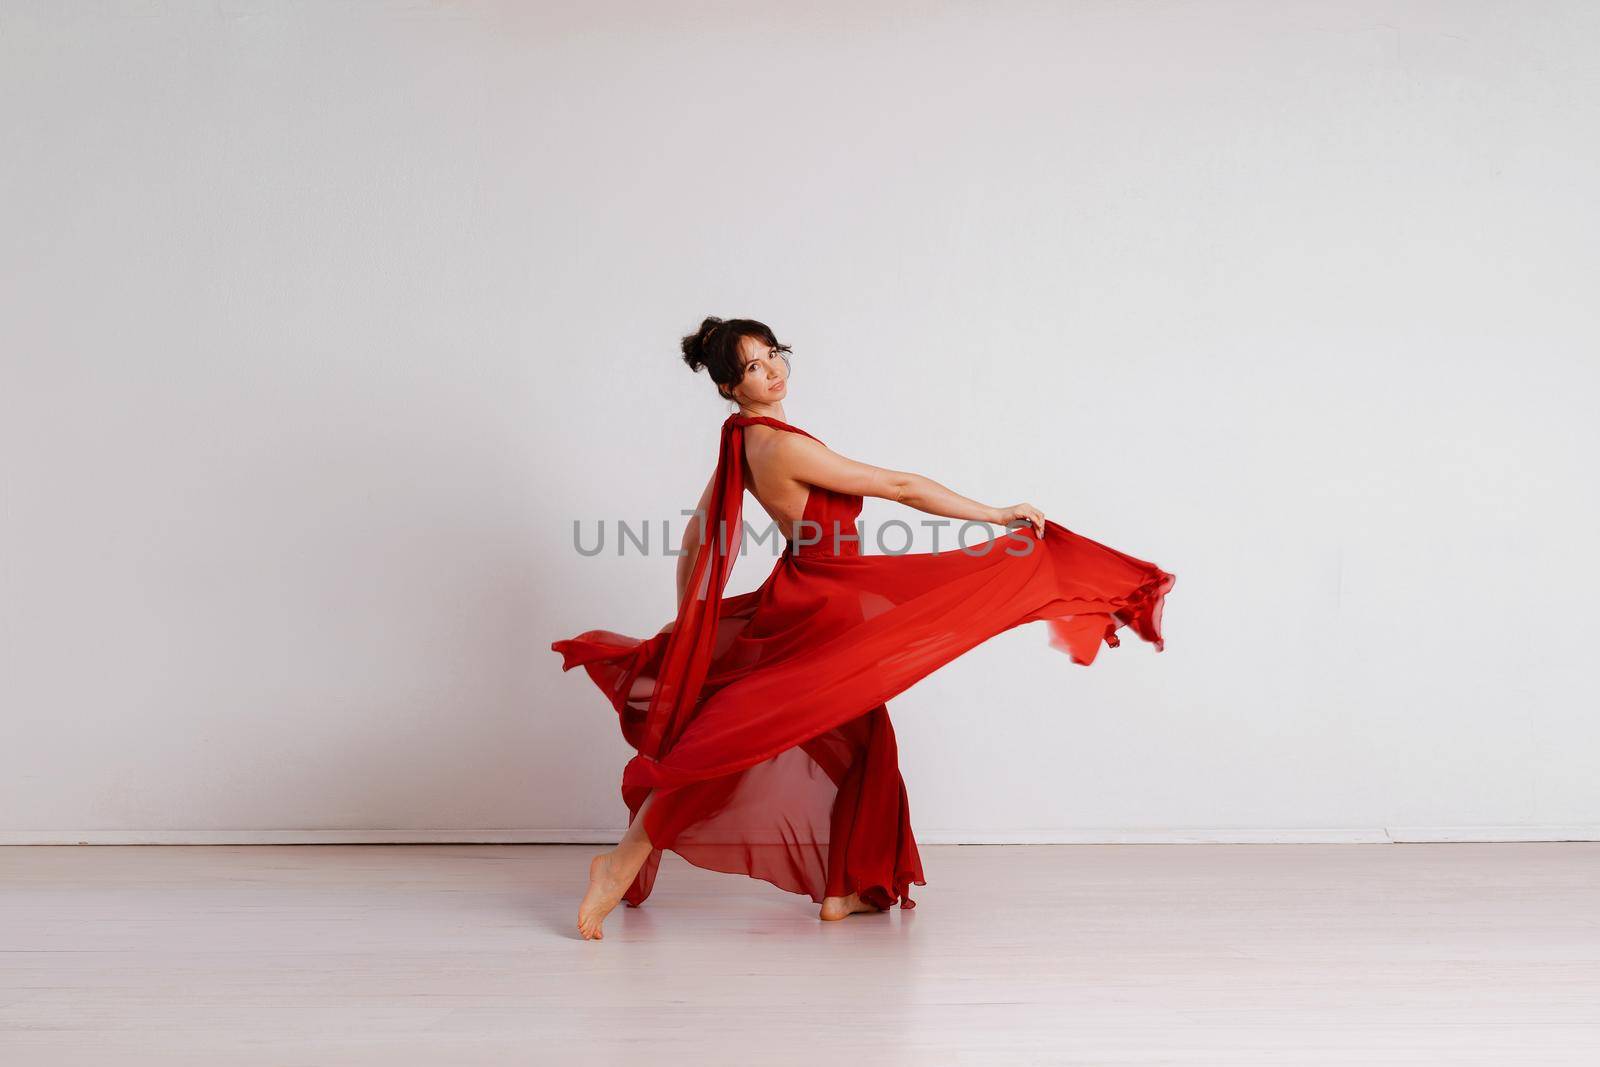 Dancer in a red flying dress. Woman ballerina dancing on a white studio background.